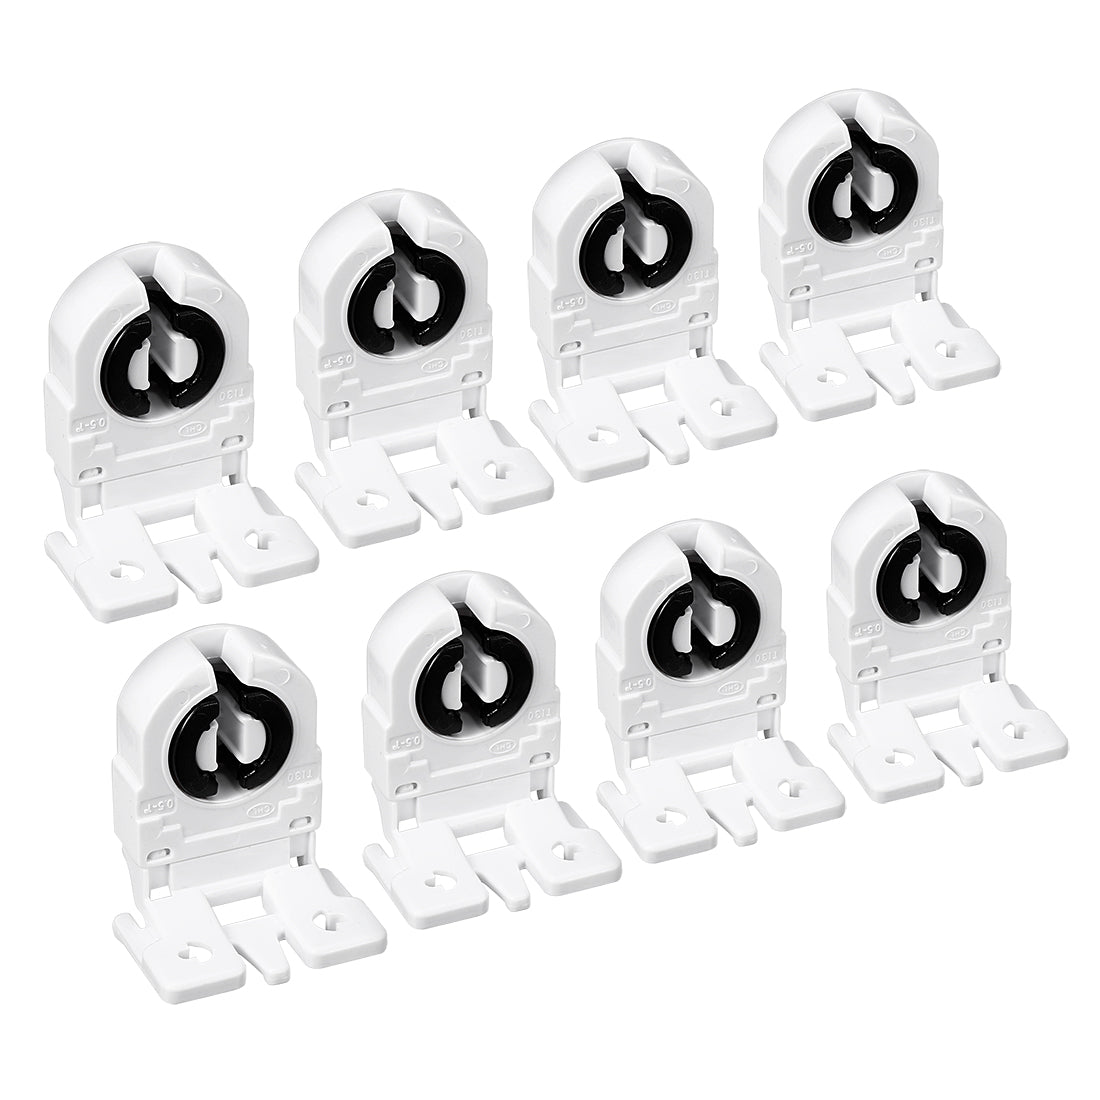 uxcell Uxcell 8 Pcs 2A T8 Socket G13 Base Fluorescent Lamp Holder Light Accessory White